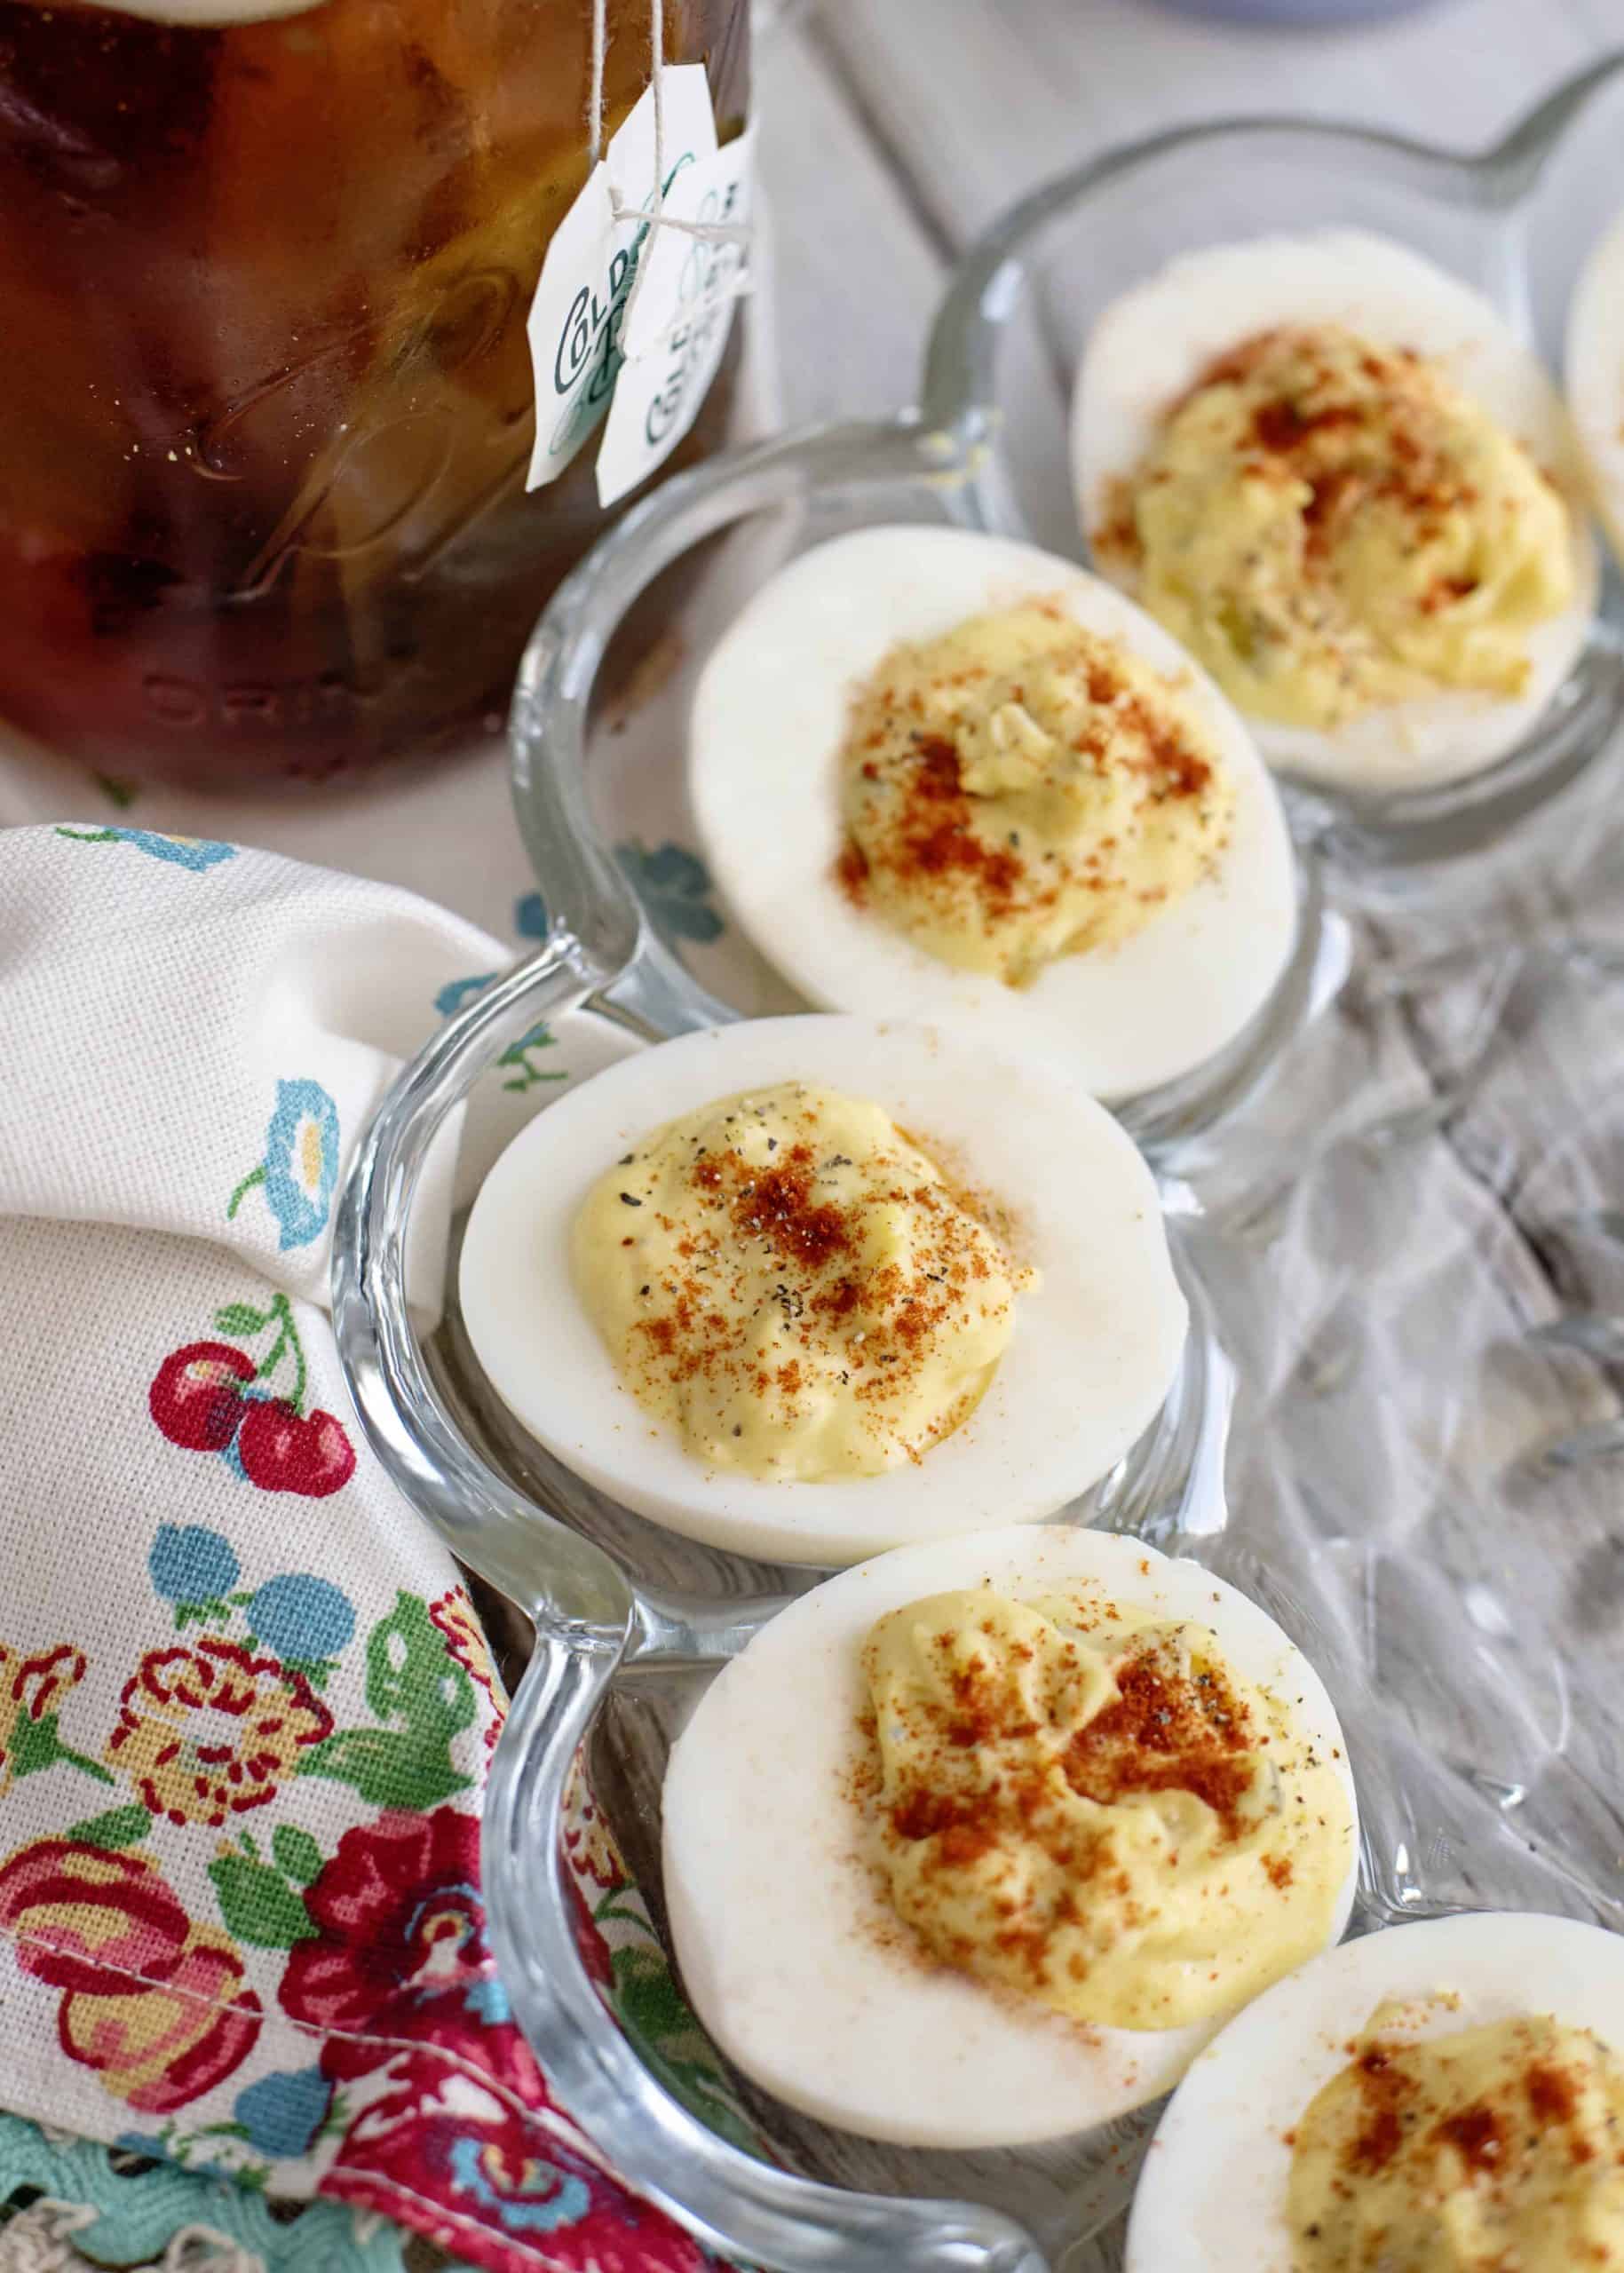 Plate of deviled eggs.